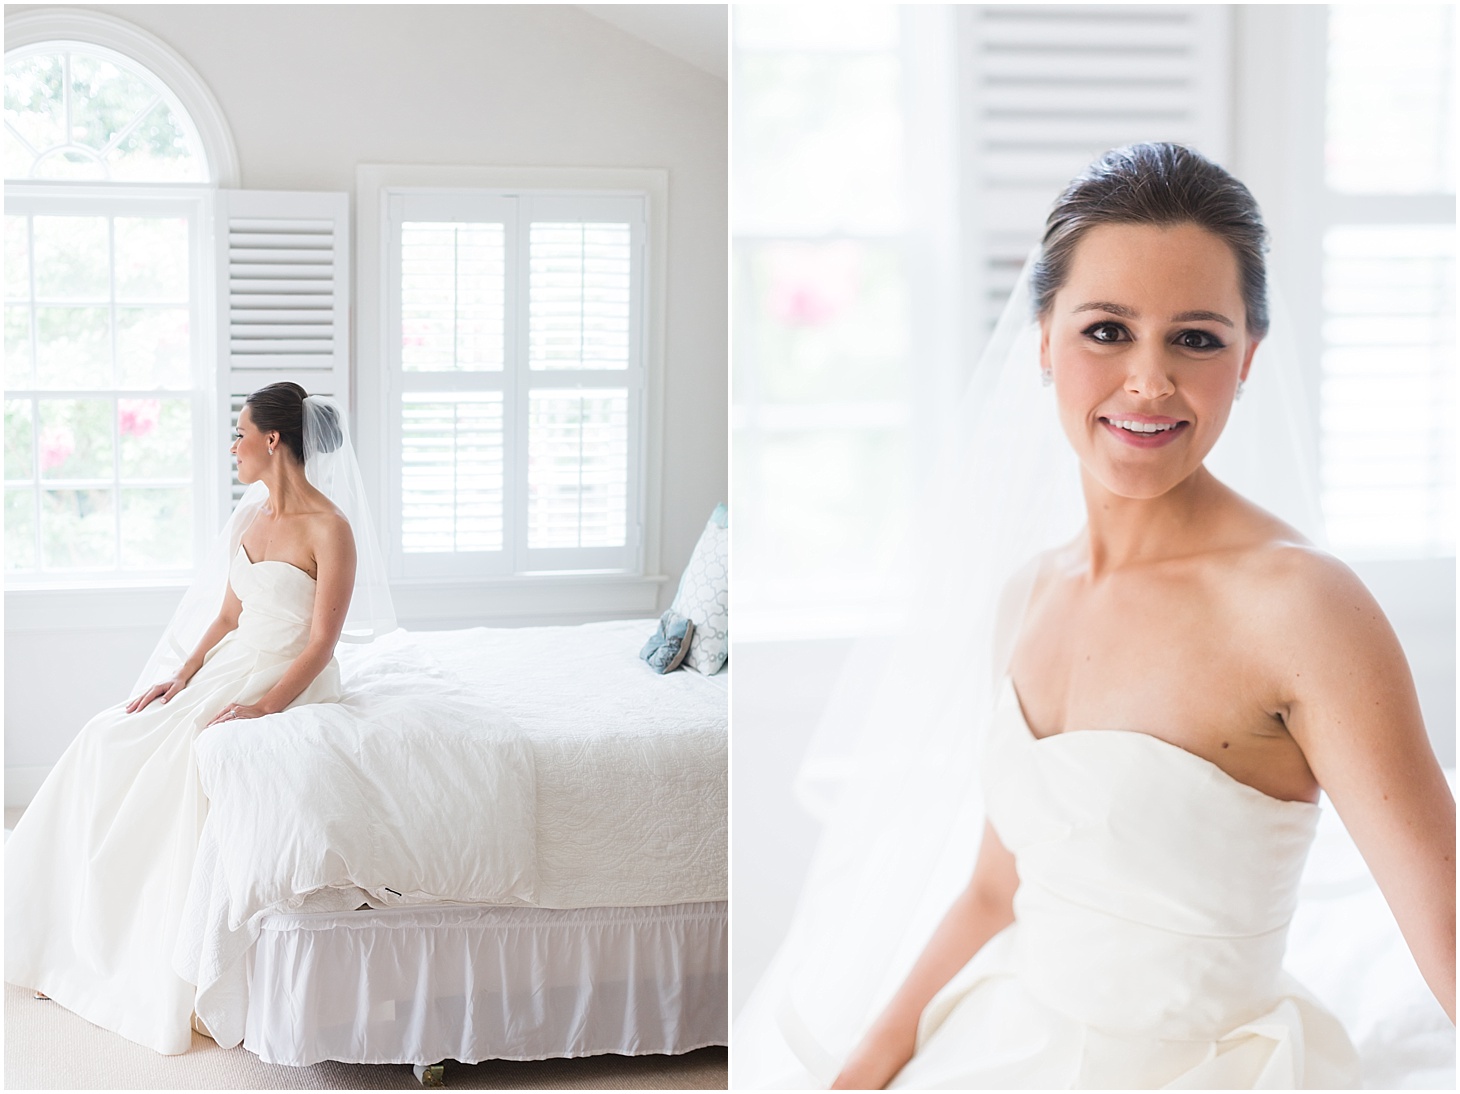 Bride Getting Ready for Summer Wedding in Amsale Gown | Summer Rooftop Wedding at The Capitol View at 400 | Sarah Bradshaw Photography | Washington DC Wedding Photographer